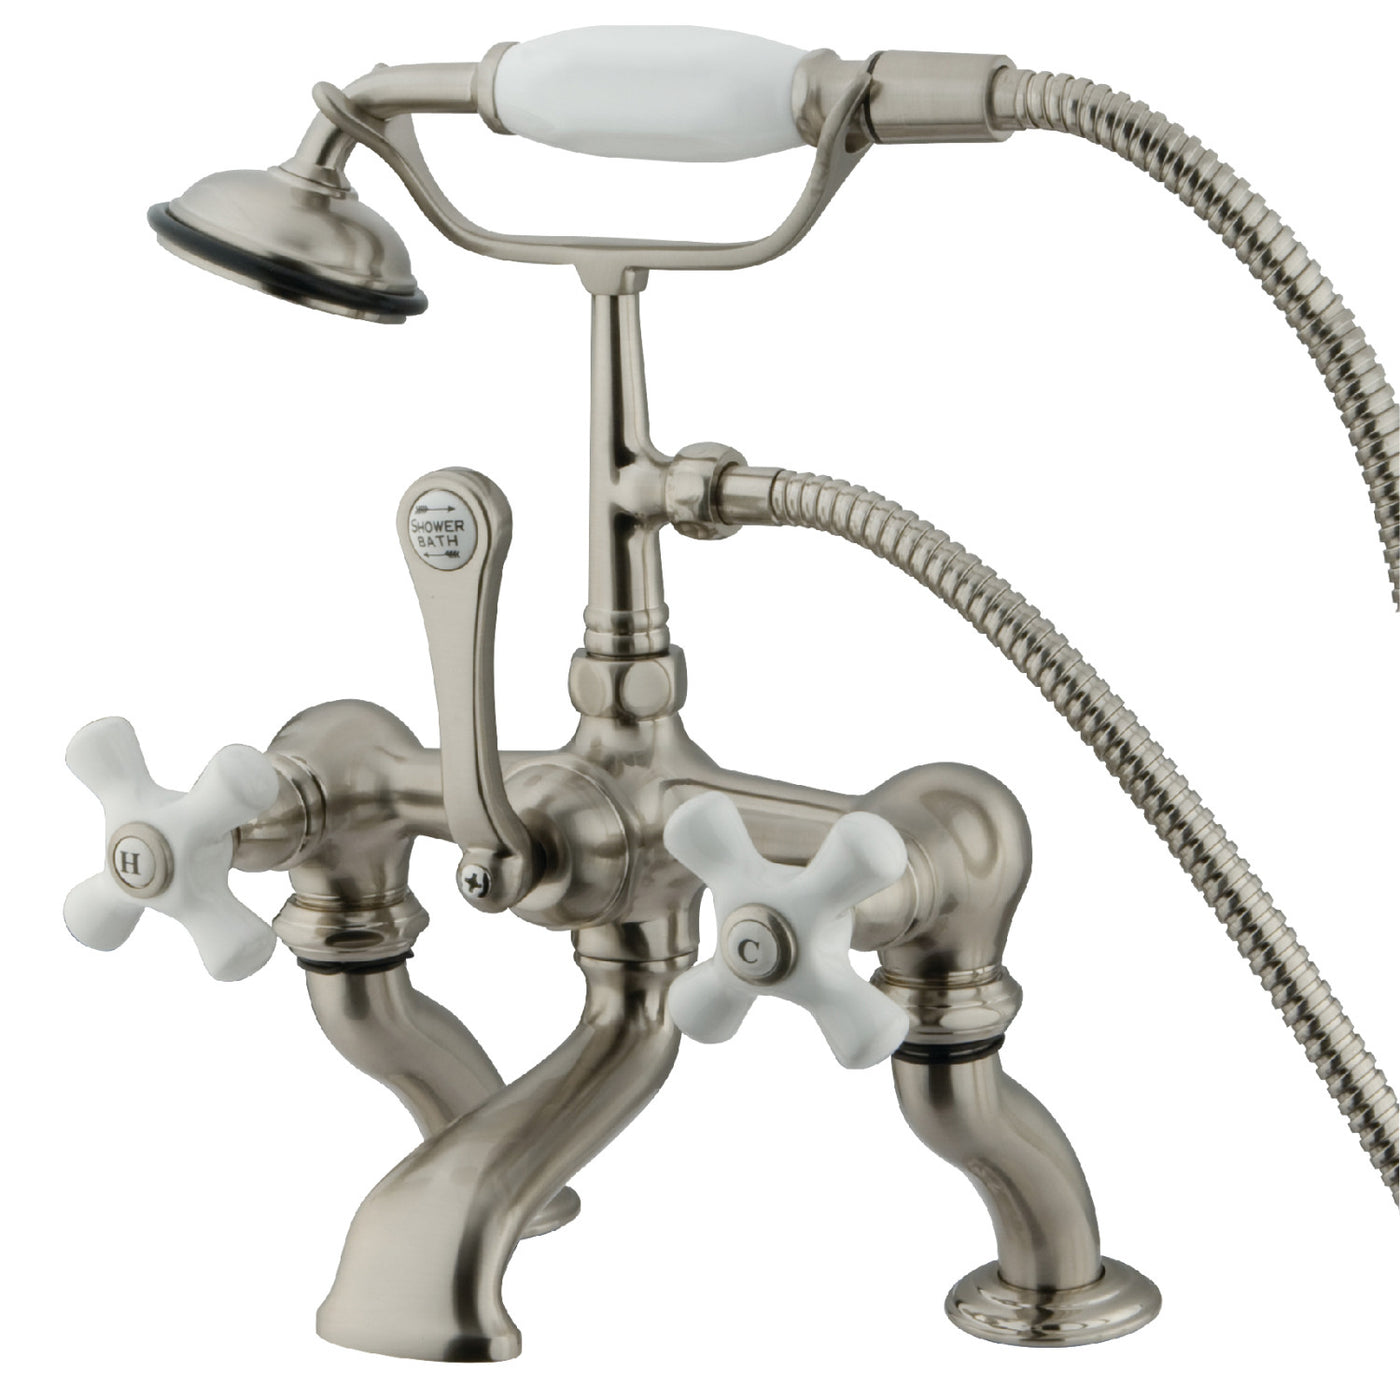 Elements of Design DT4098PX 7-Inch Deck Mount Tub Faucet with Hand Shower, Brushed Nickel